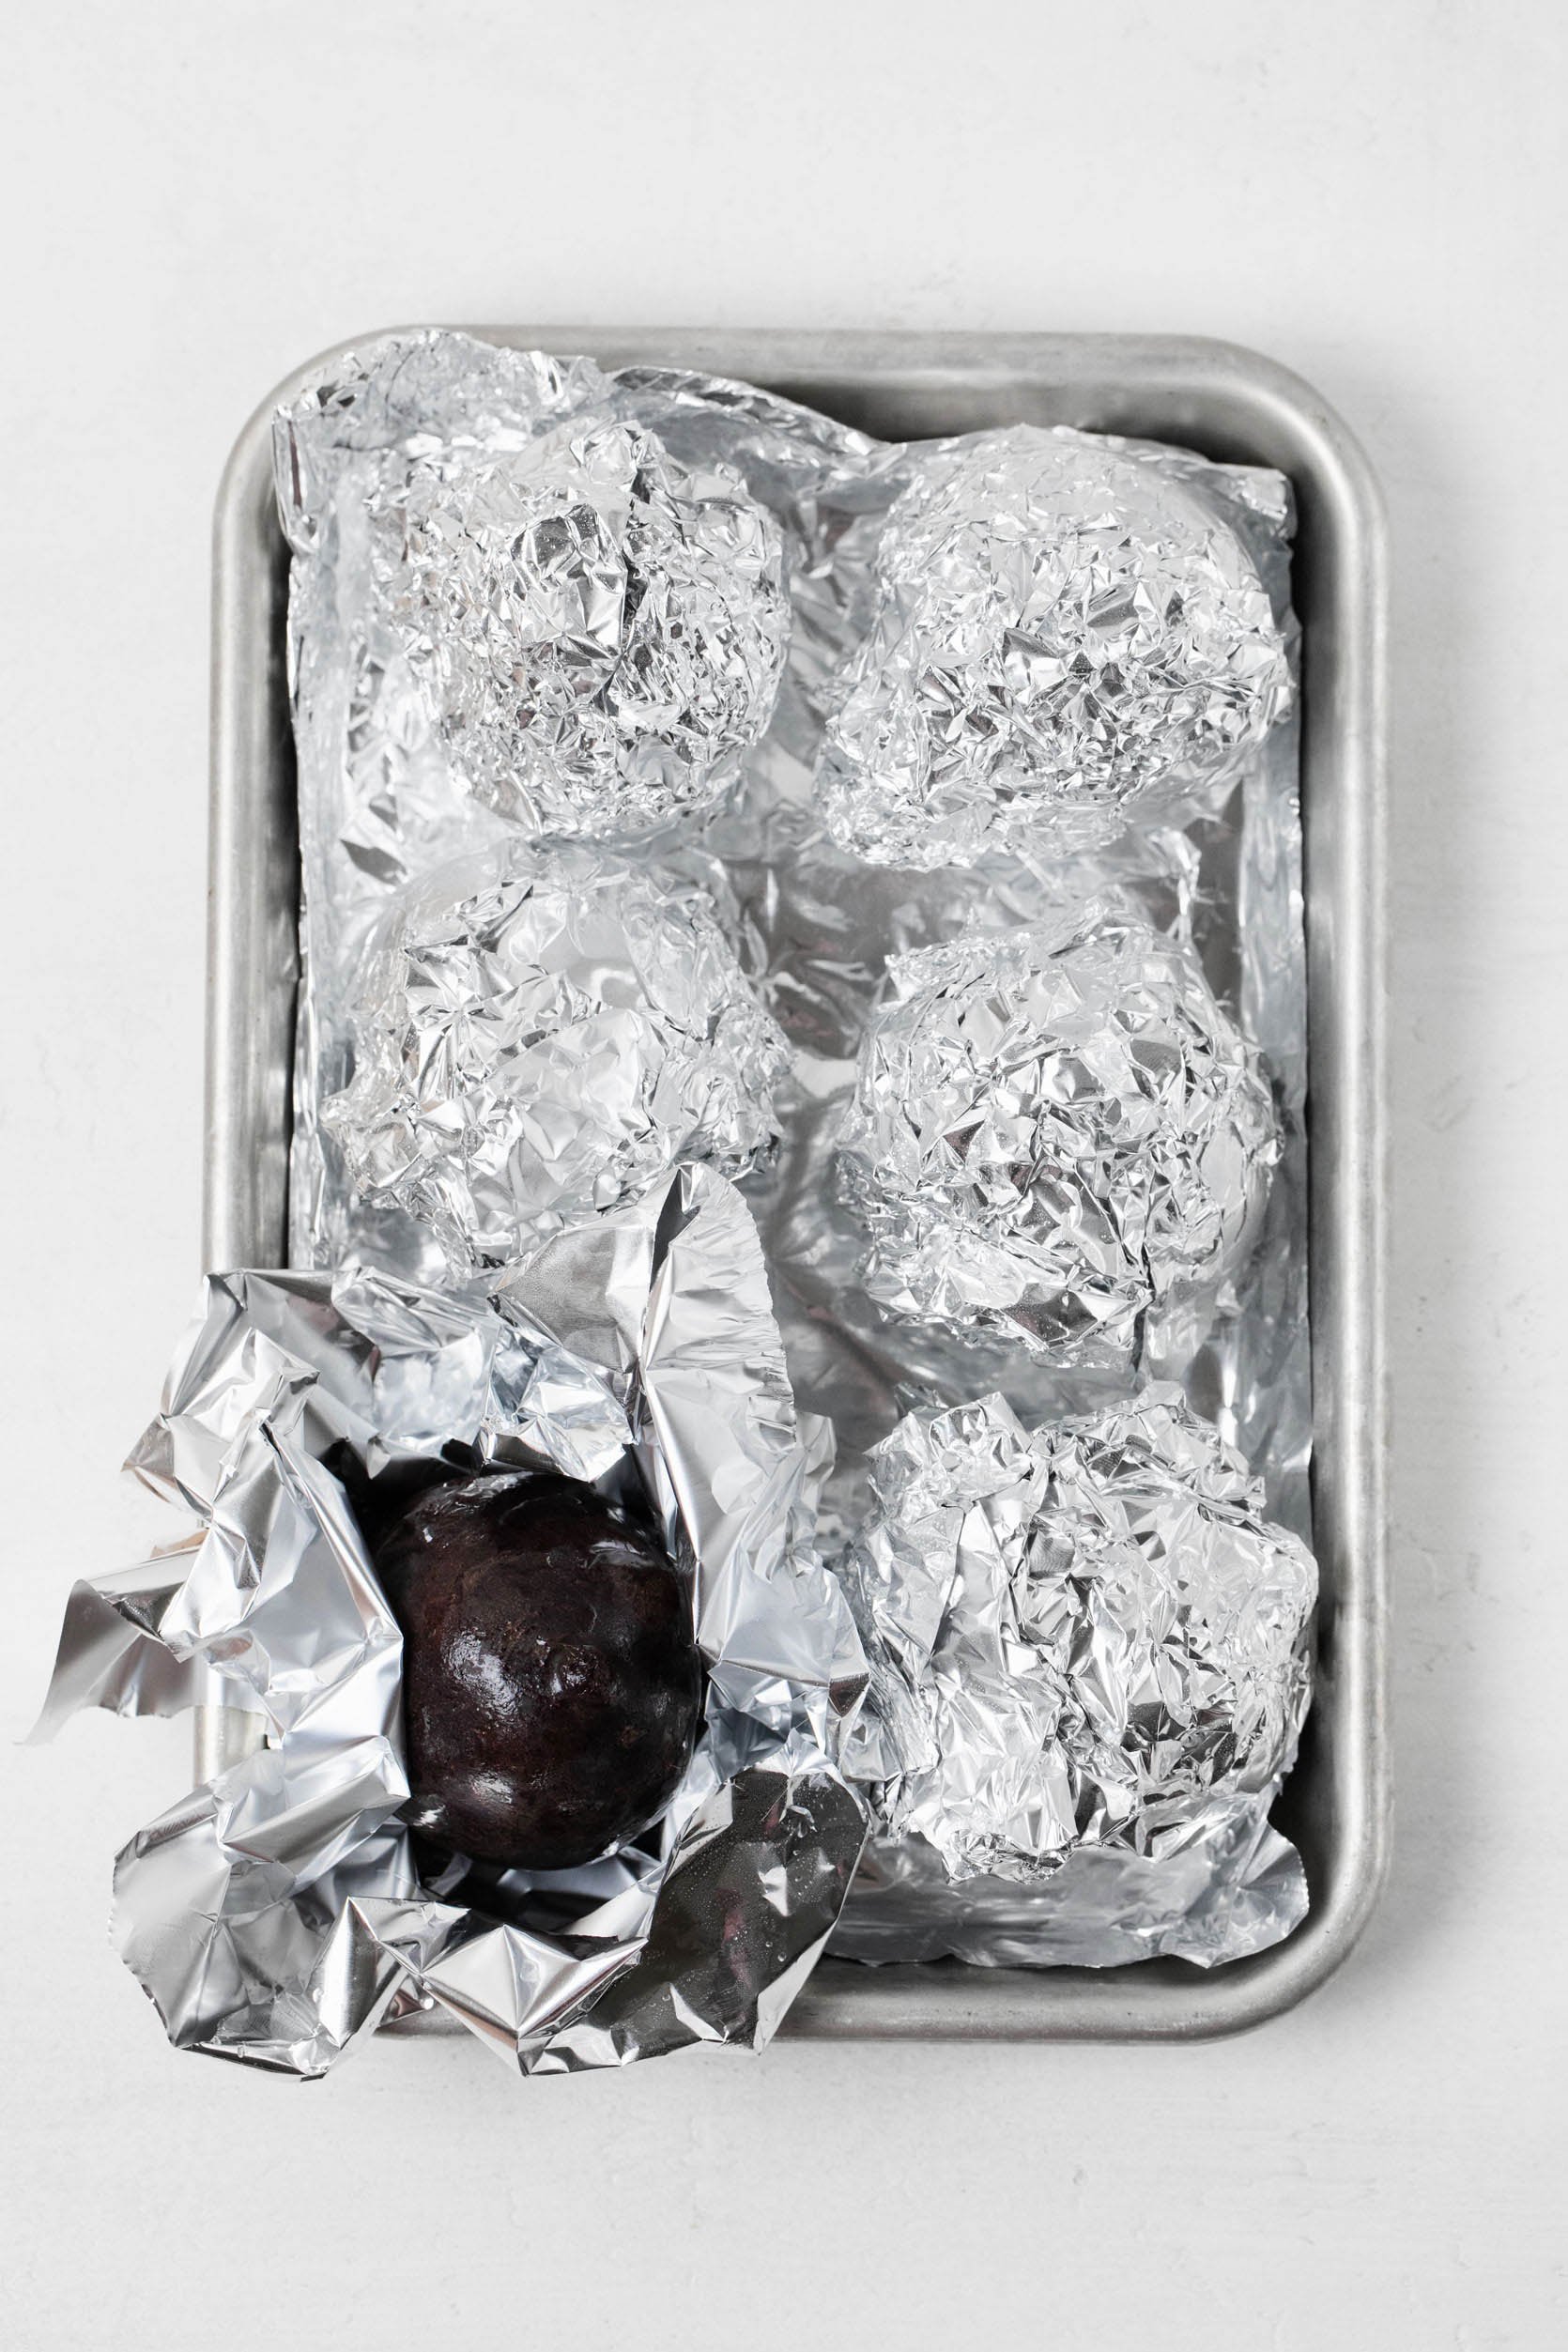 A small, aluminum baking tray holds foil-wrapped vegetables.